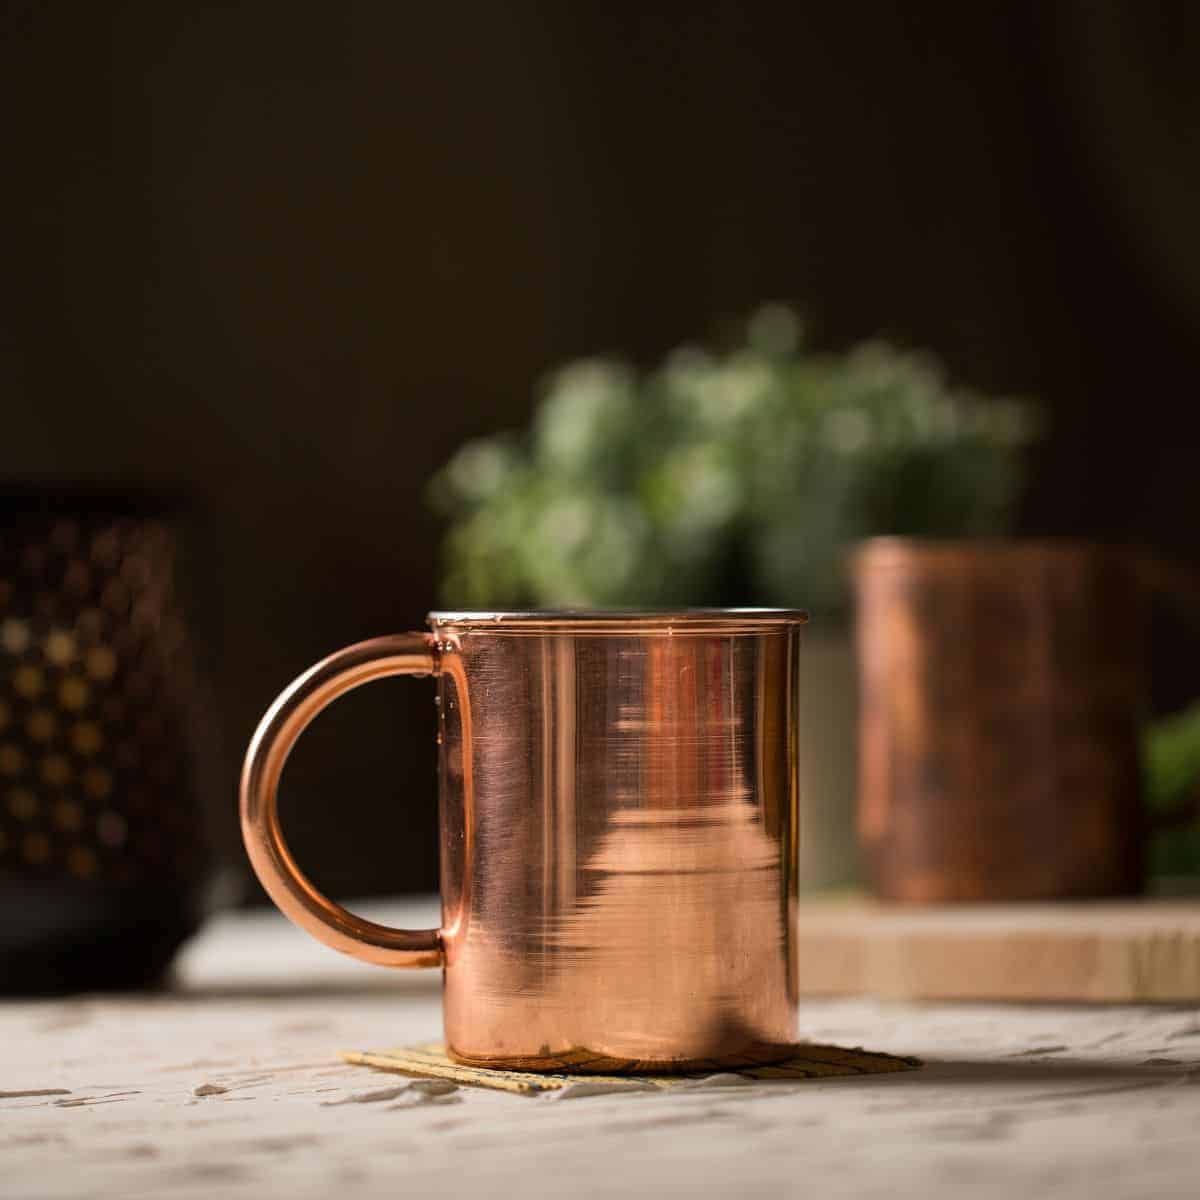 How to Clean Copper Mugs: 3 Easy Ways